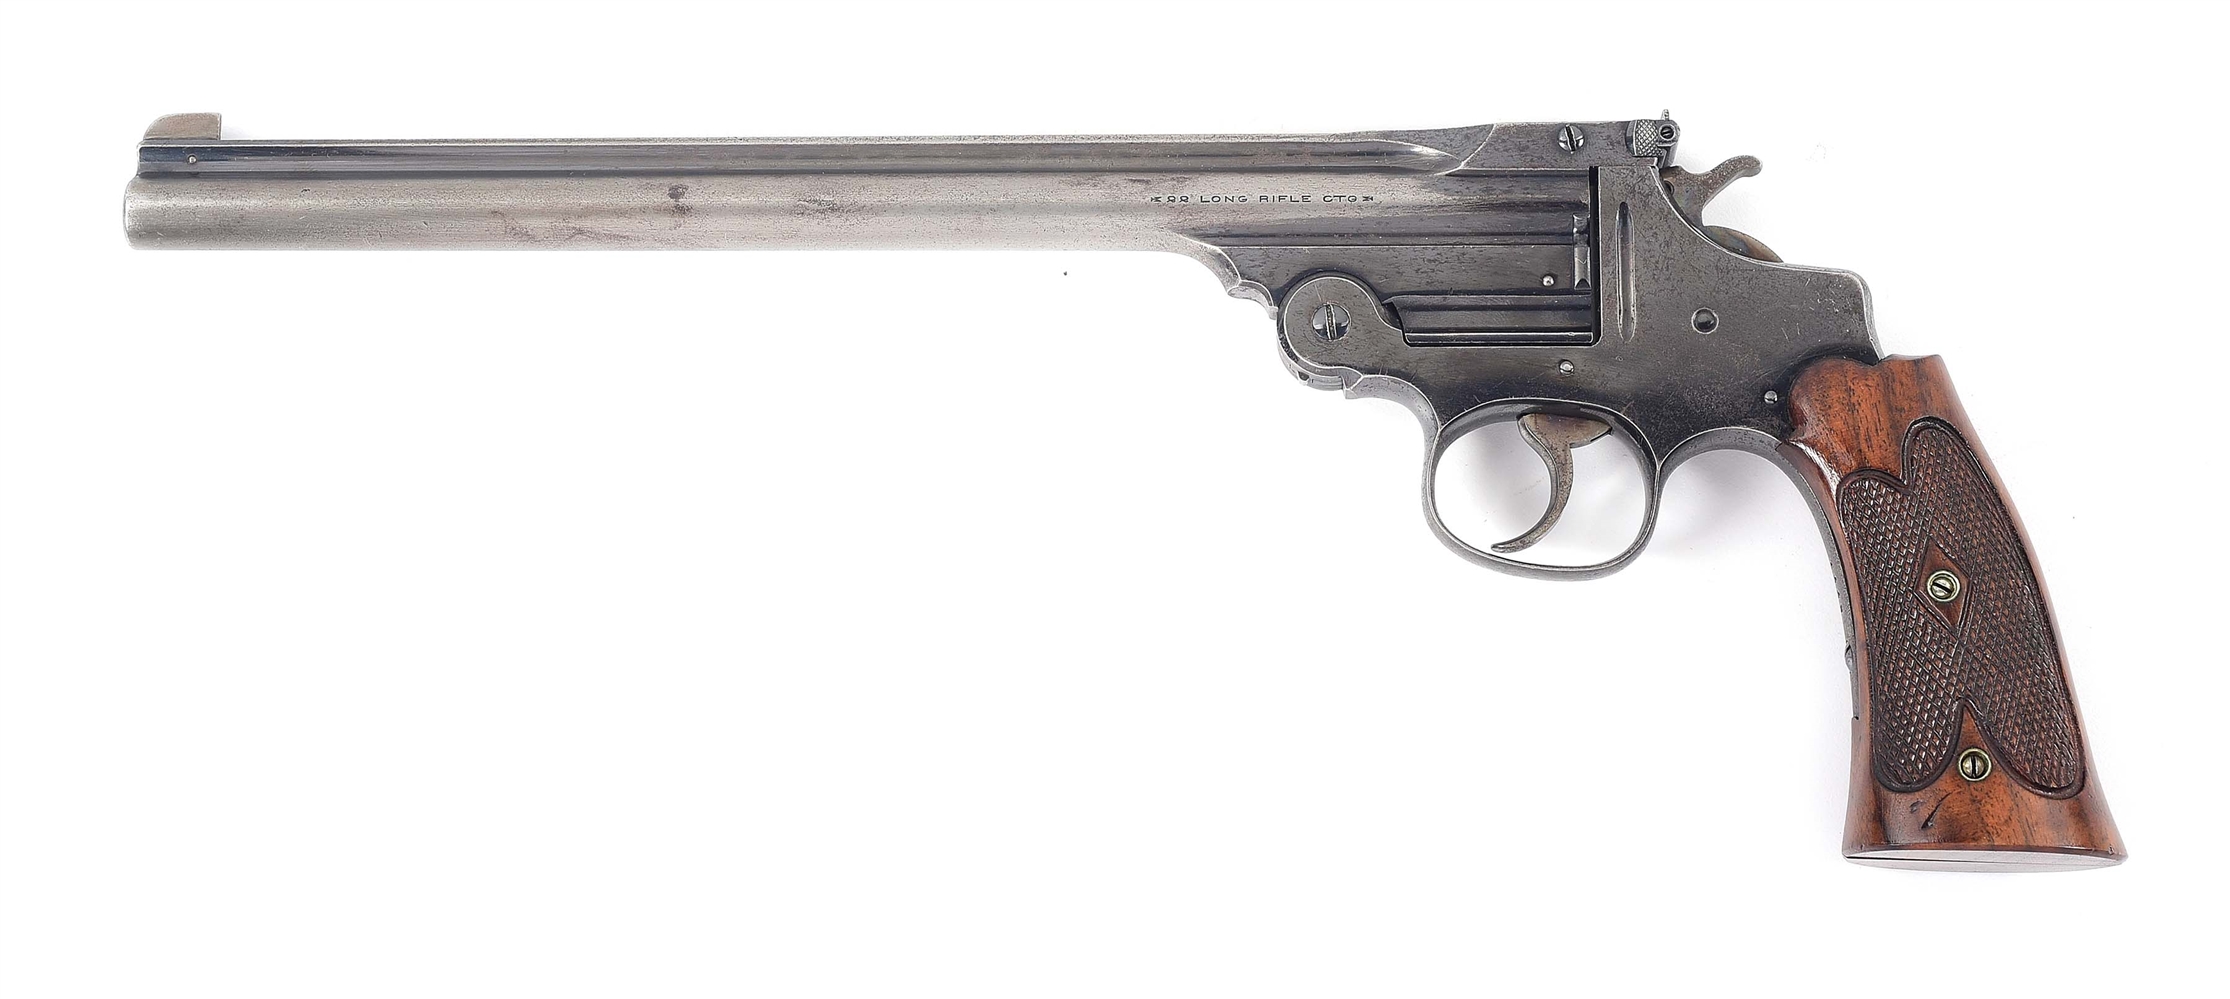 (C) SMITH & WESSON THIRD MODEL PERFECTED TARGET PISTOL.